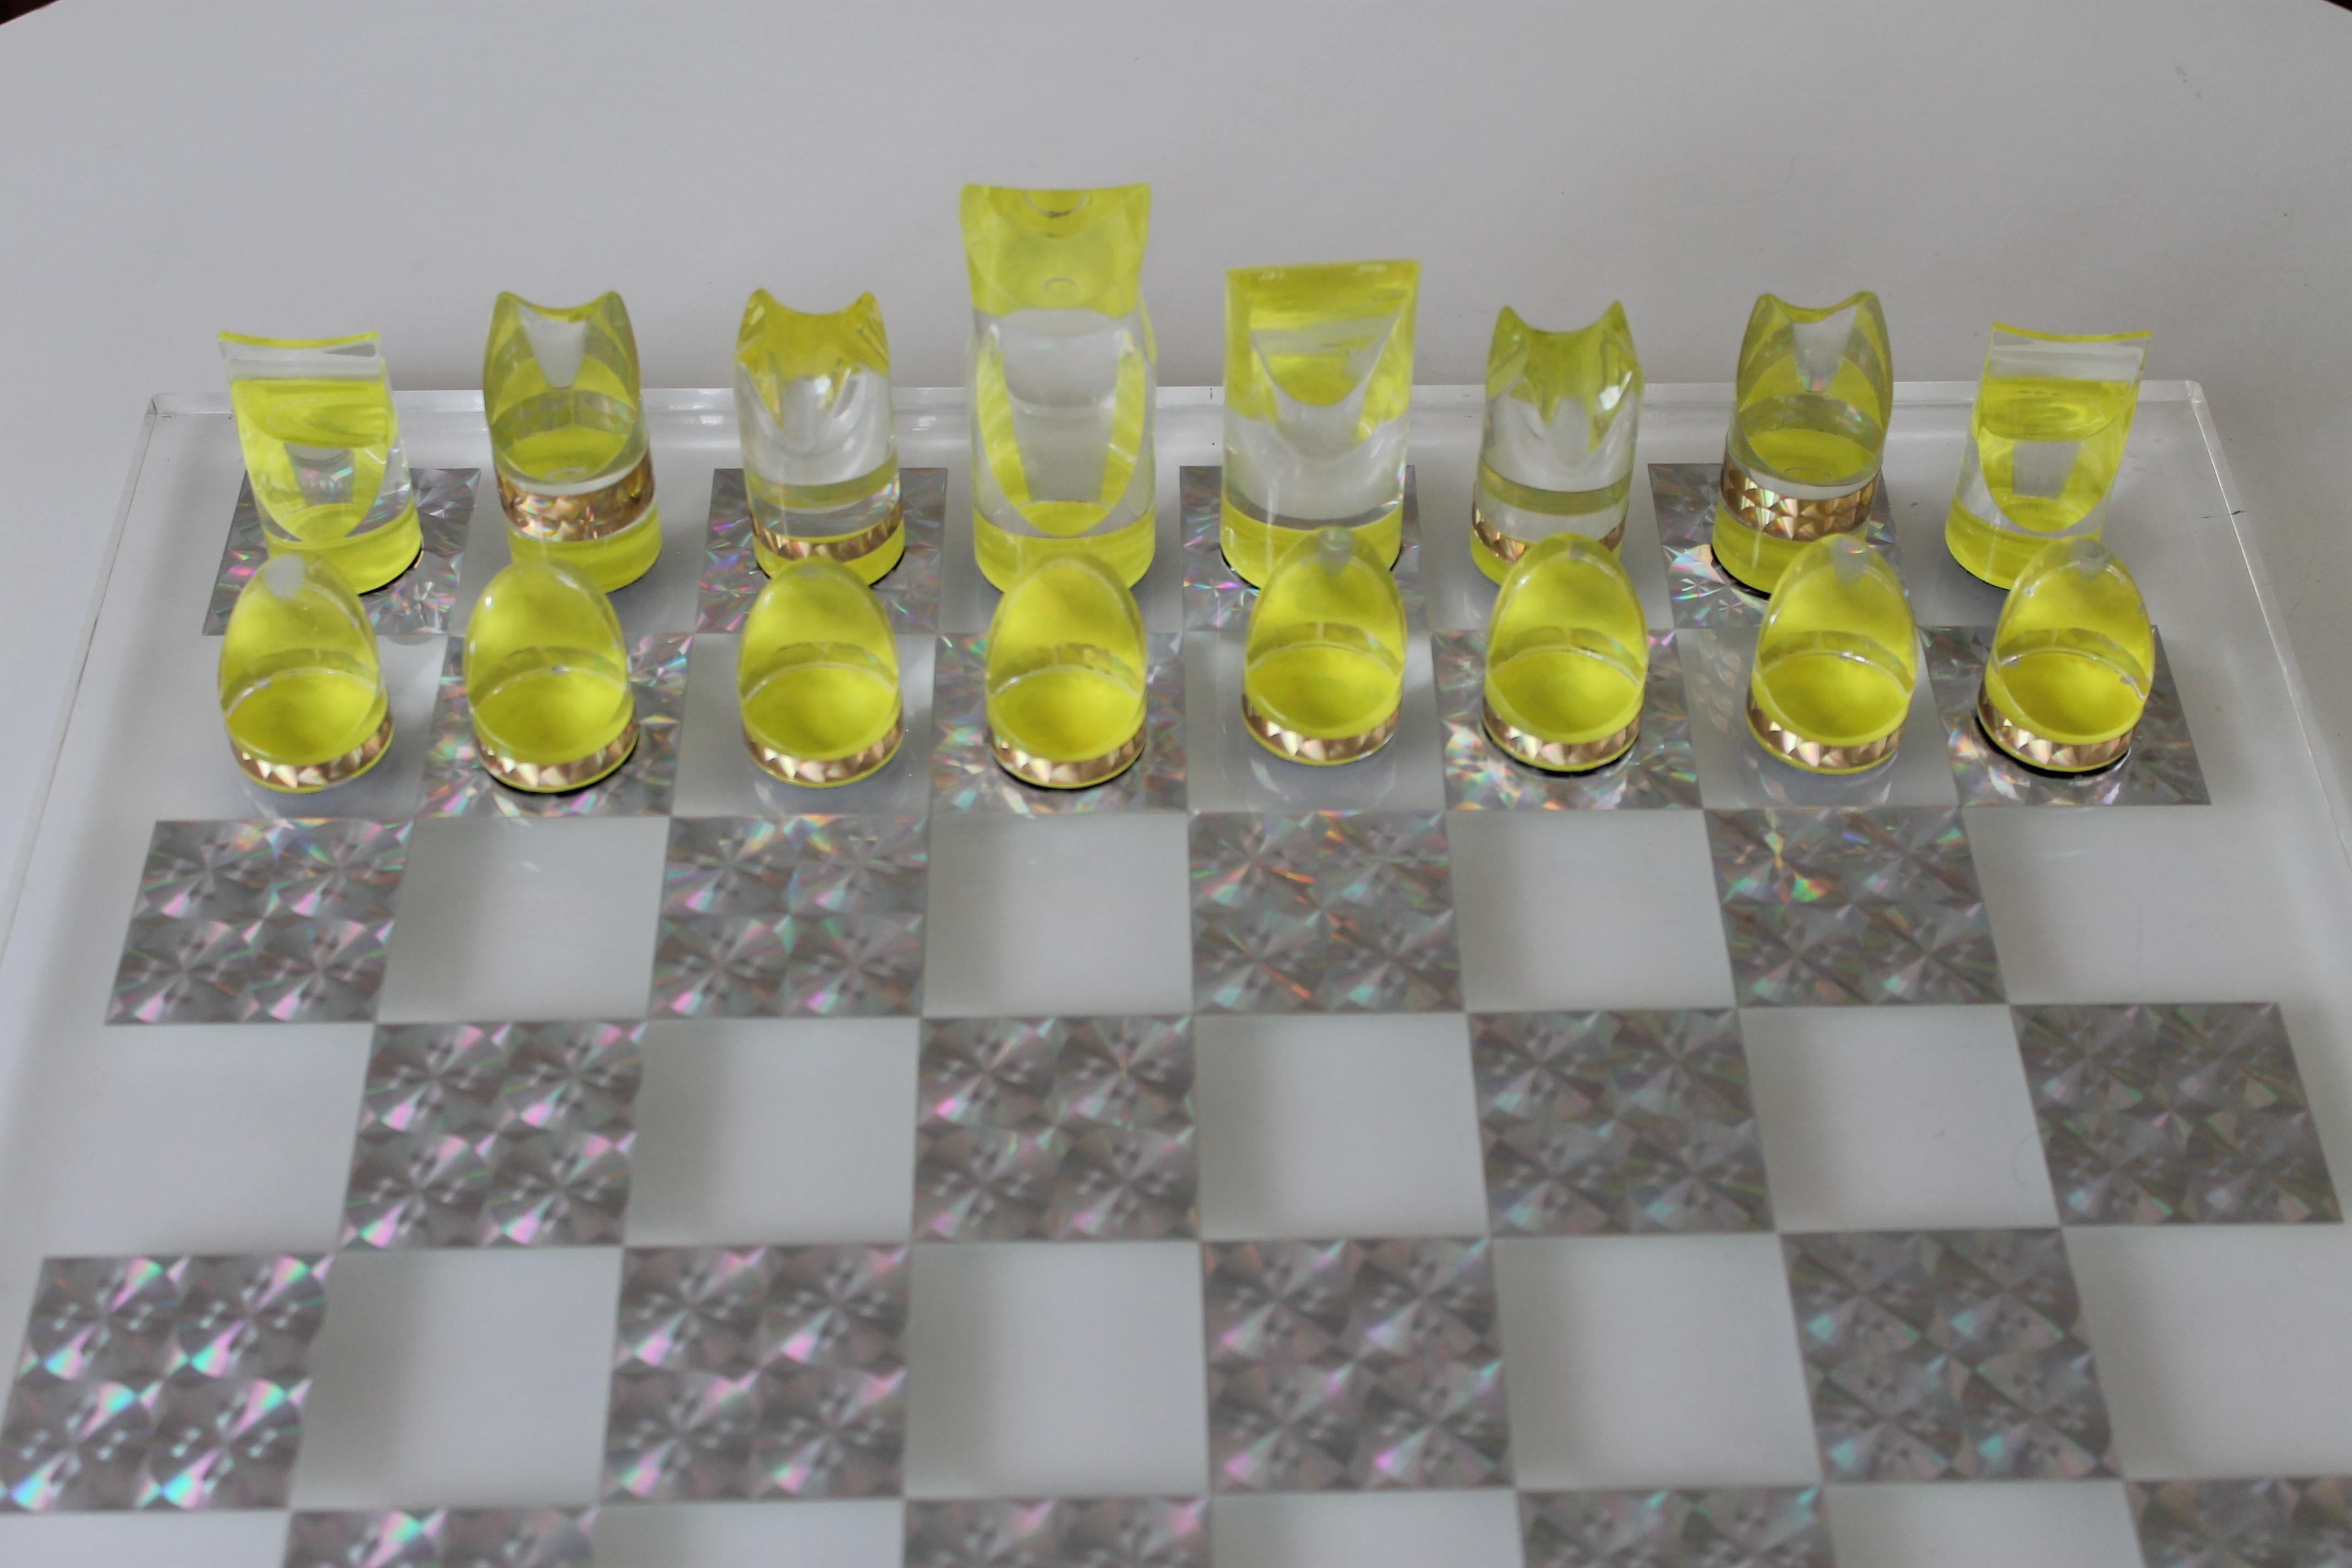 psychedelic chess board